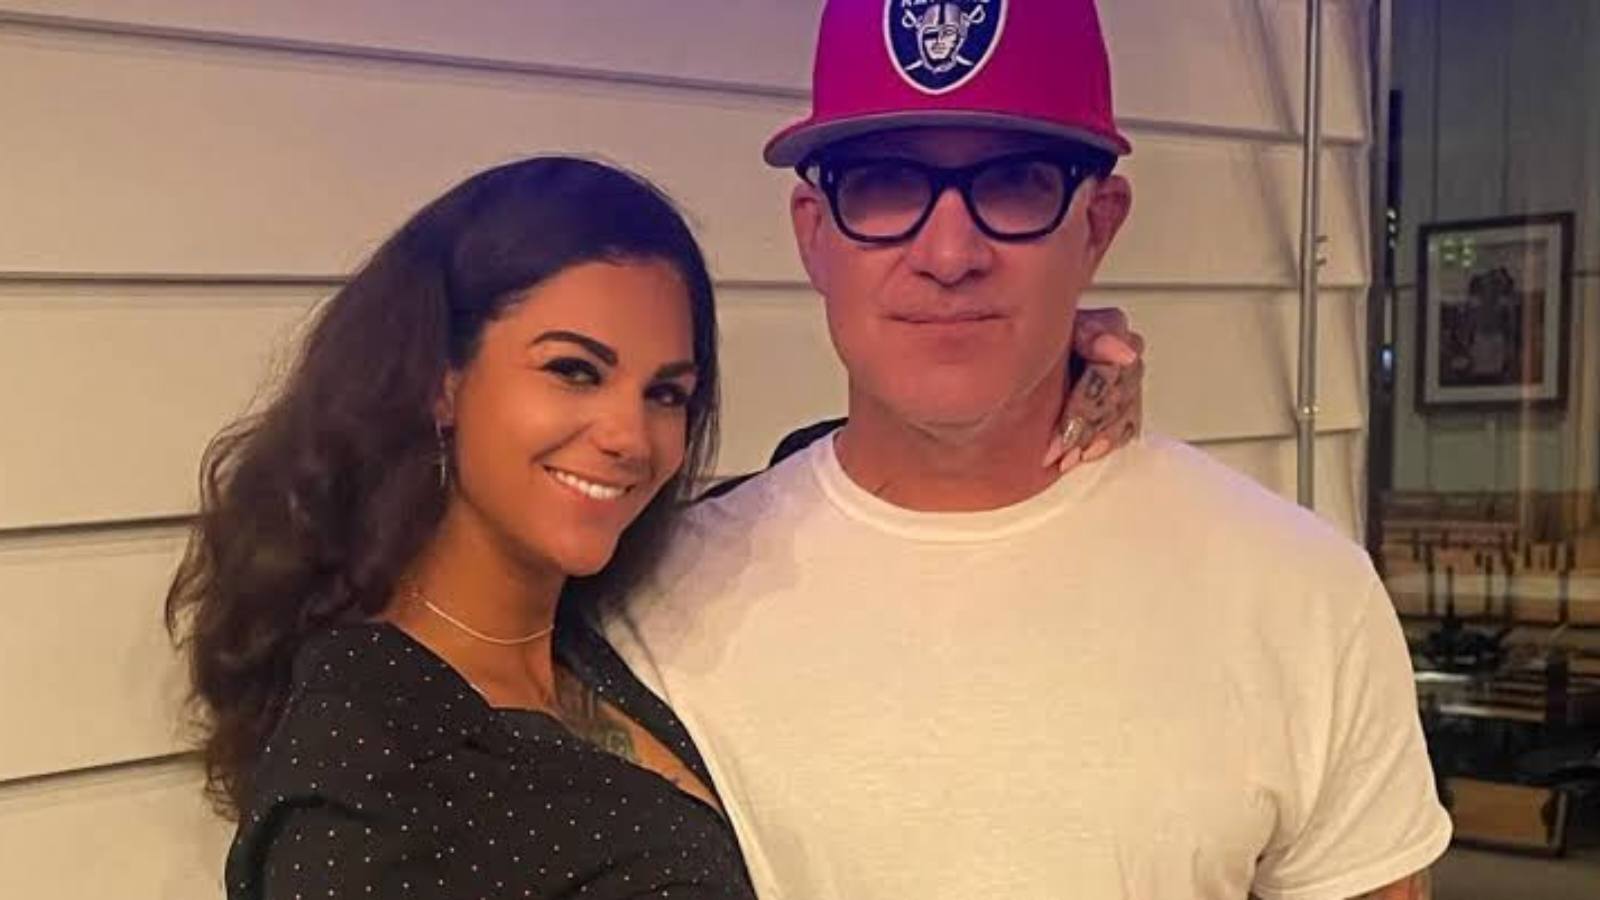 Sandra Bullocks Ex Jesse James Ties The Knot For The 5th Time With Porn Star Bonnie Rotten picture